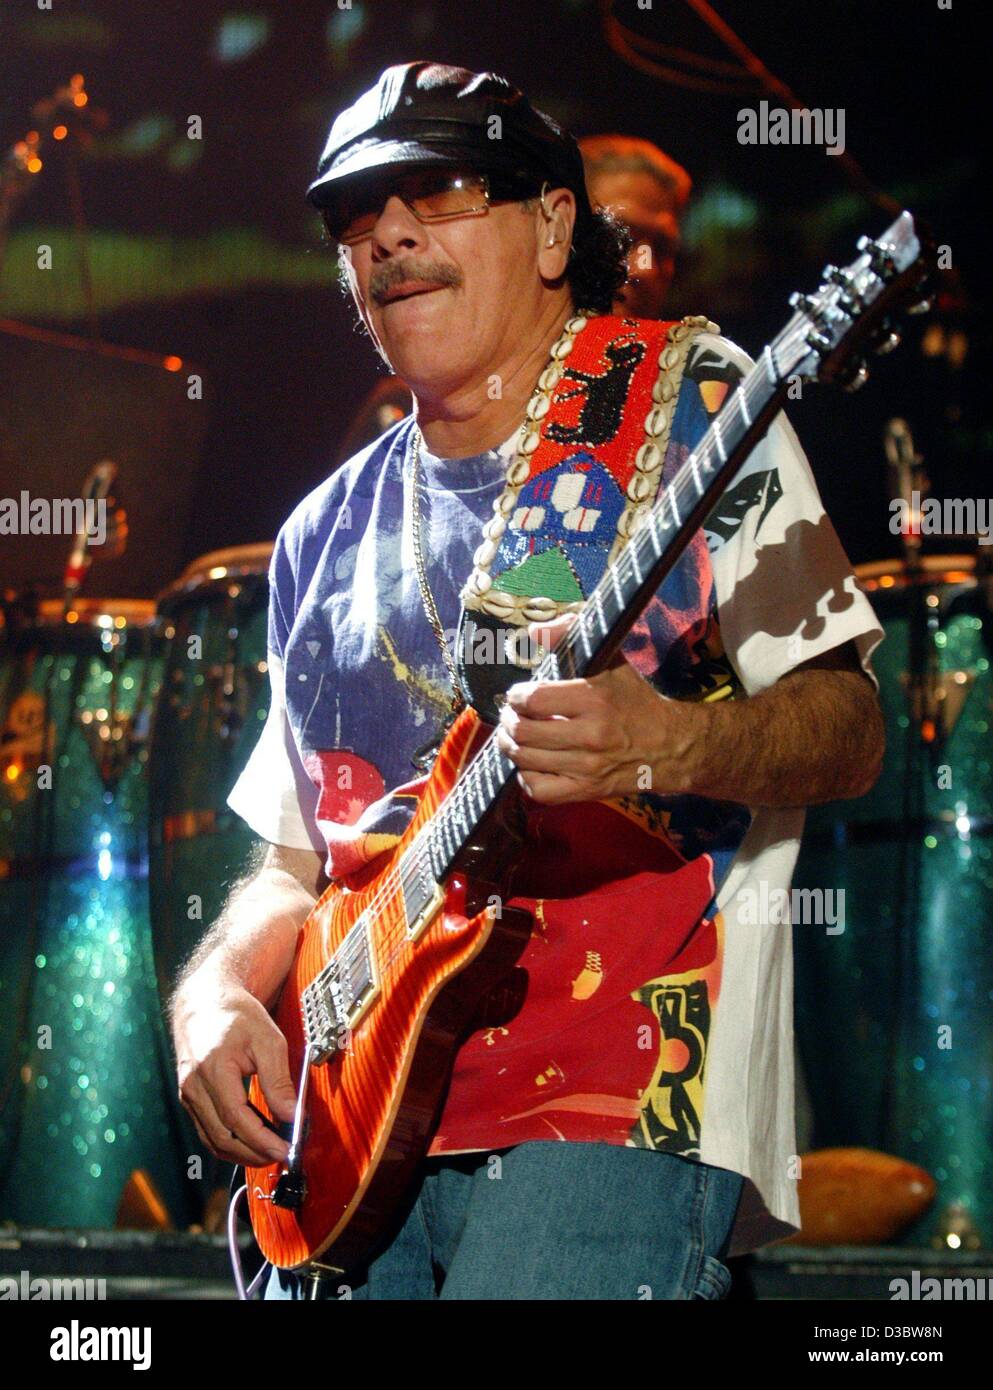 dpa) - Mexican guitar virtuoso Carlos Santana plays his guitar during the  concert in Hamburg, 2 September 2003. The 56-year-old musician enthused  thousands of fans on the first concert of his Germany